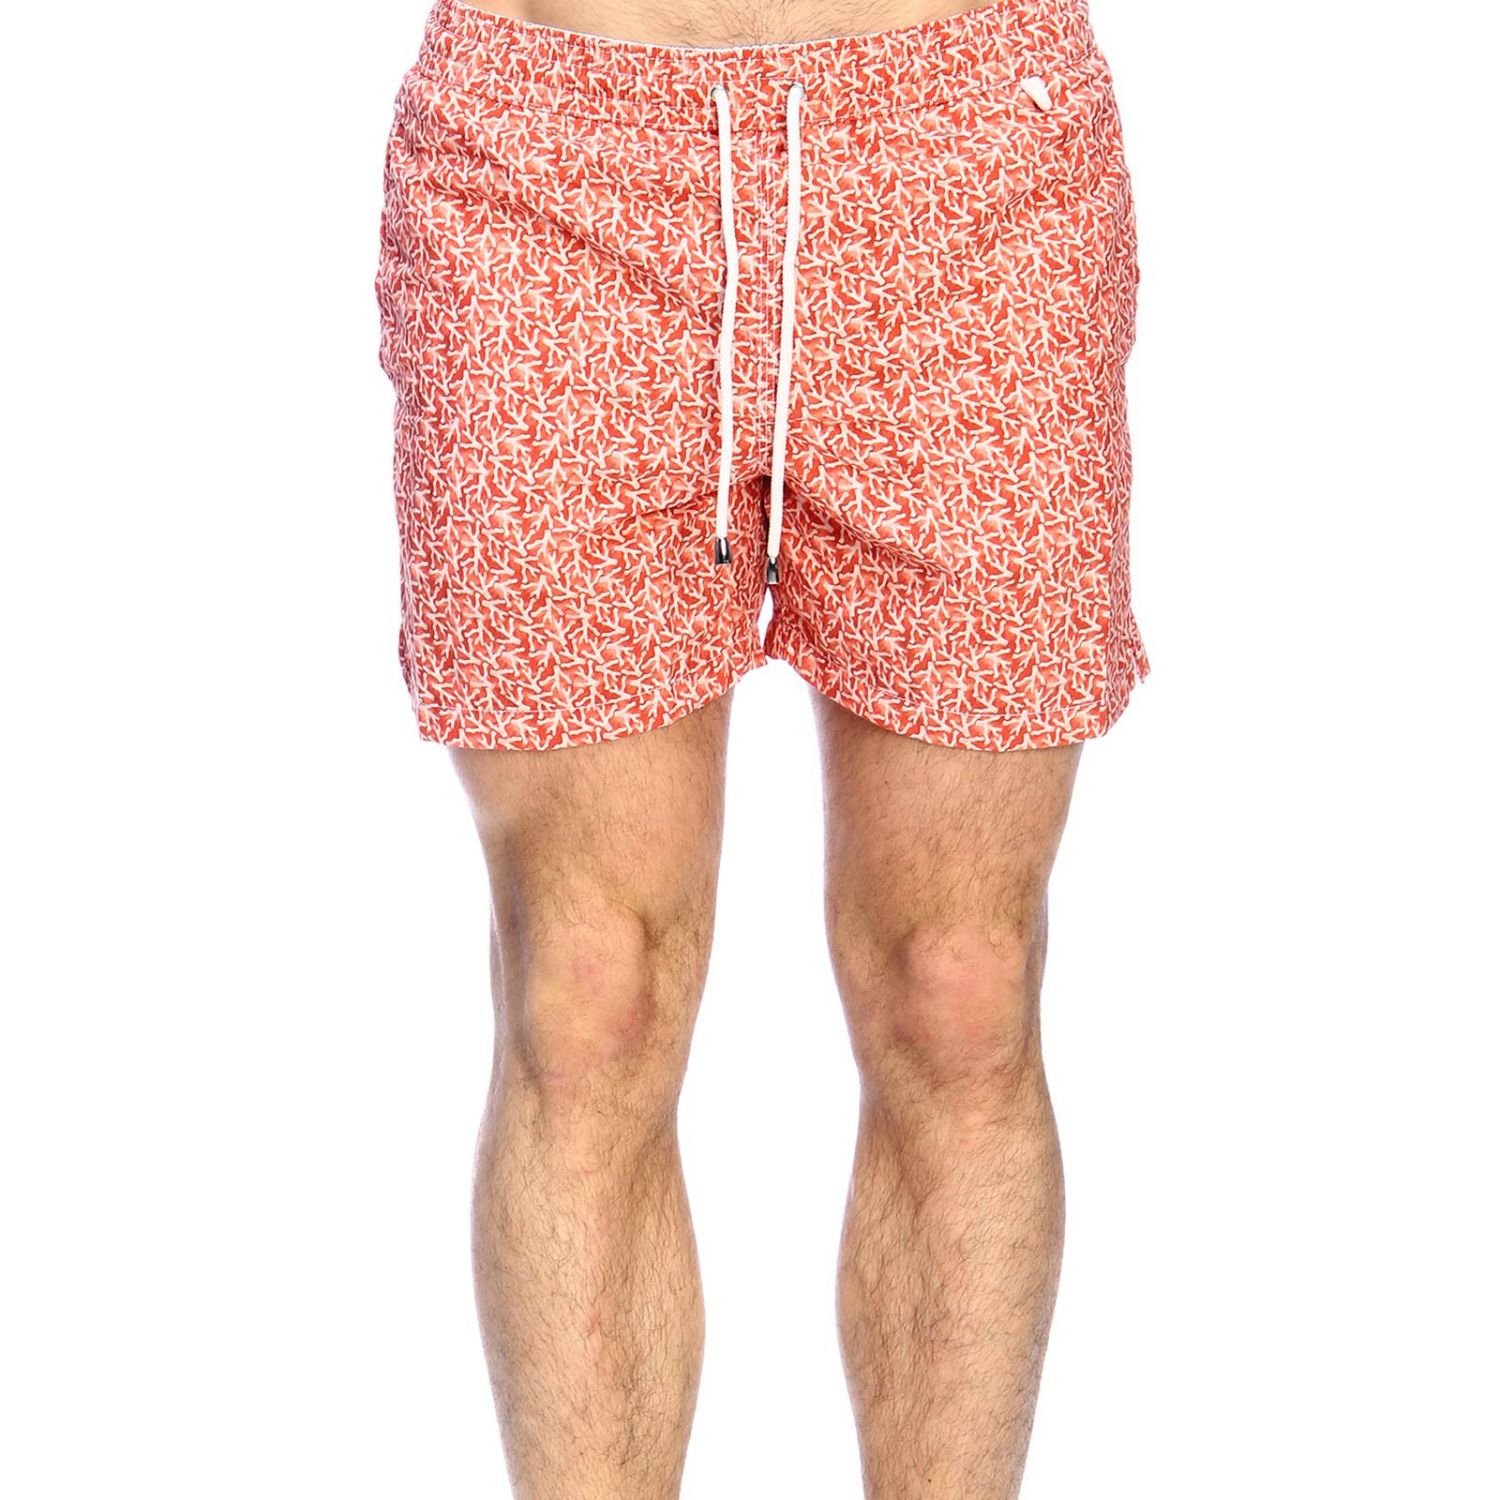 Isaia Outlet: Swimsuit men - Red | Swimsuit Isaia COS011 BW089 GIGLIO.COM